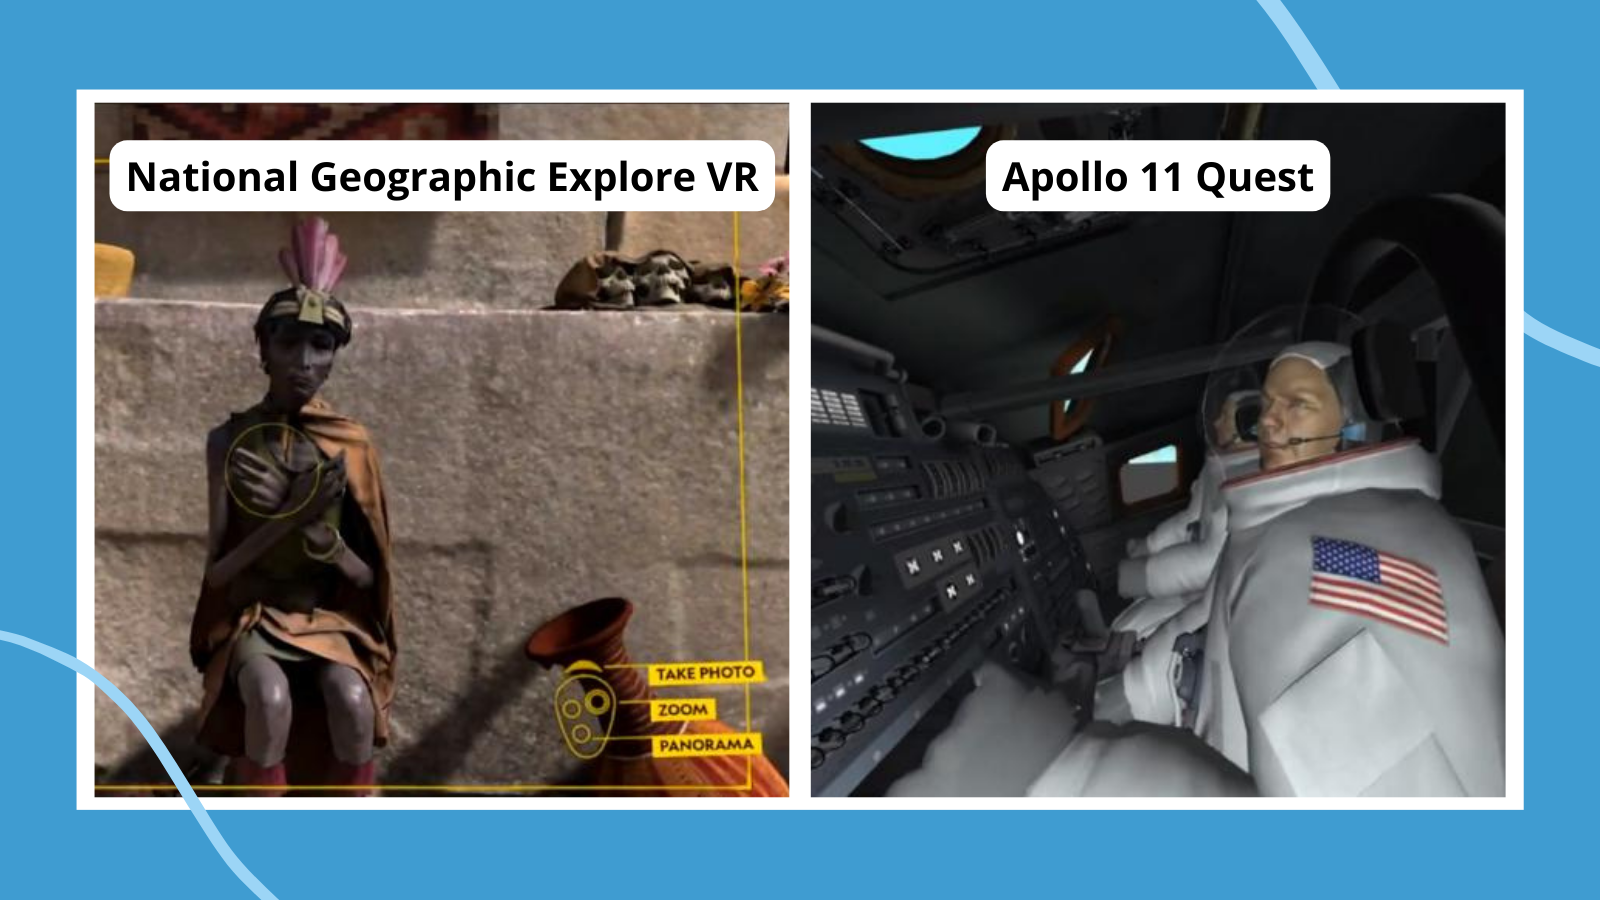 Examples of the best VR games for kids and students including National Geographic Explorers VR and Apollo 11 Quest